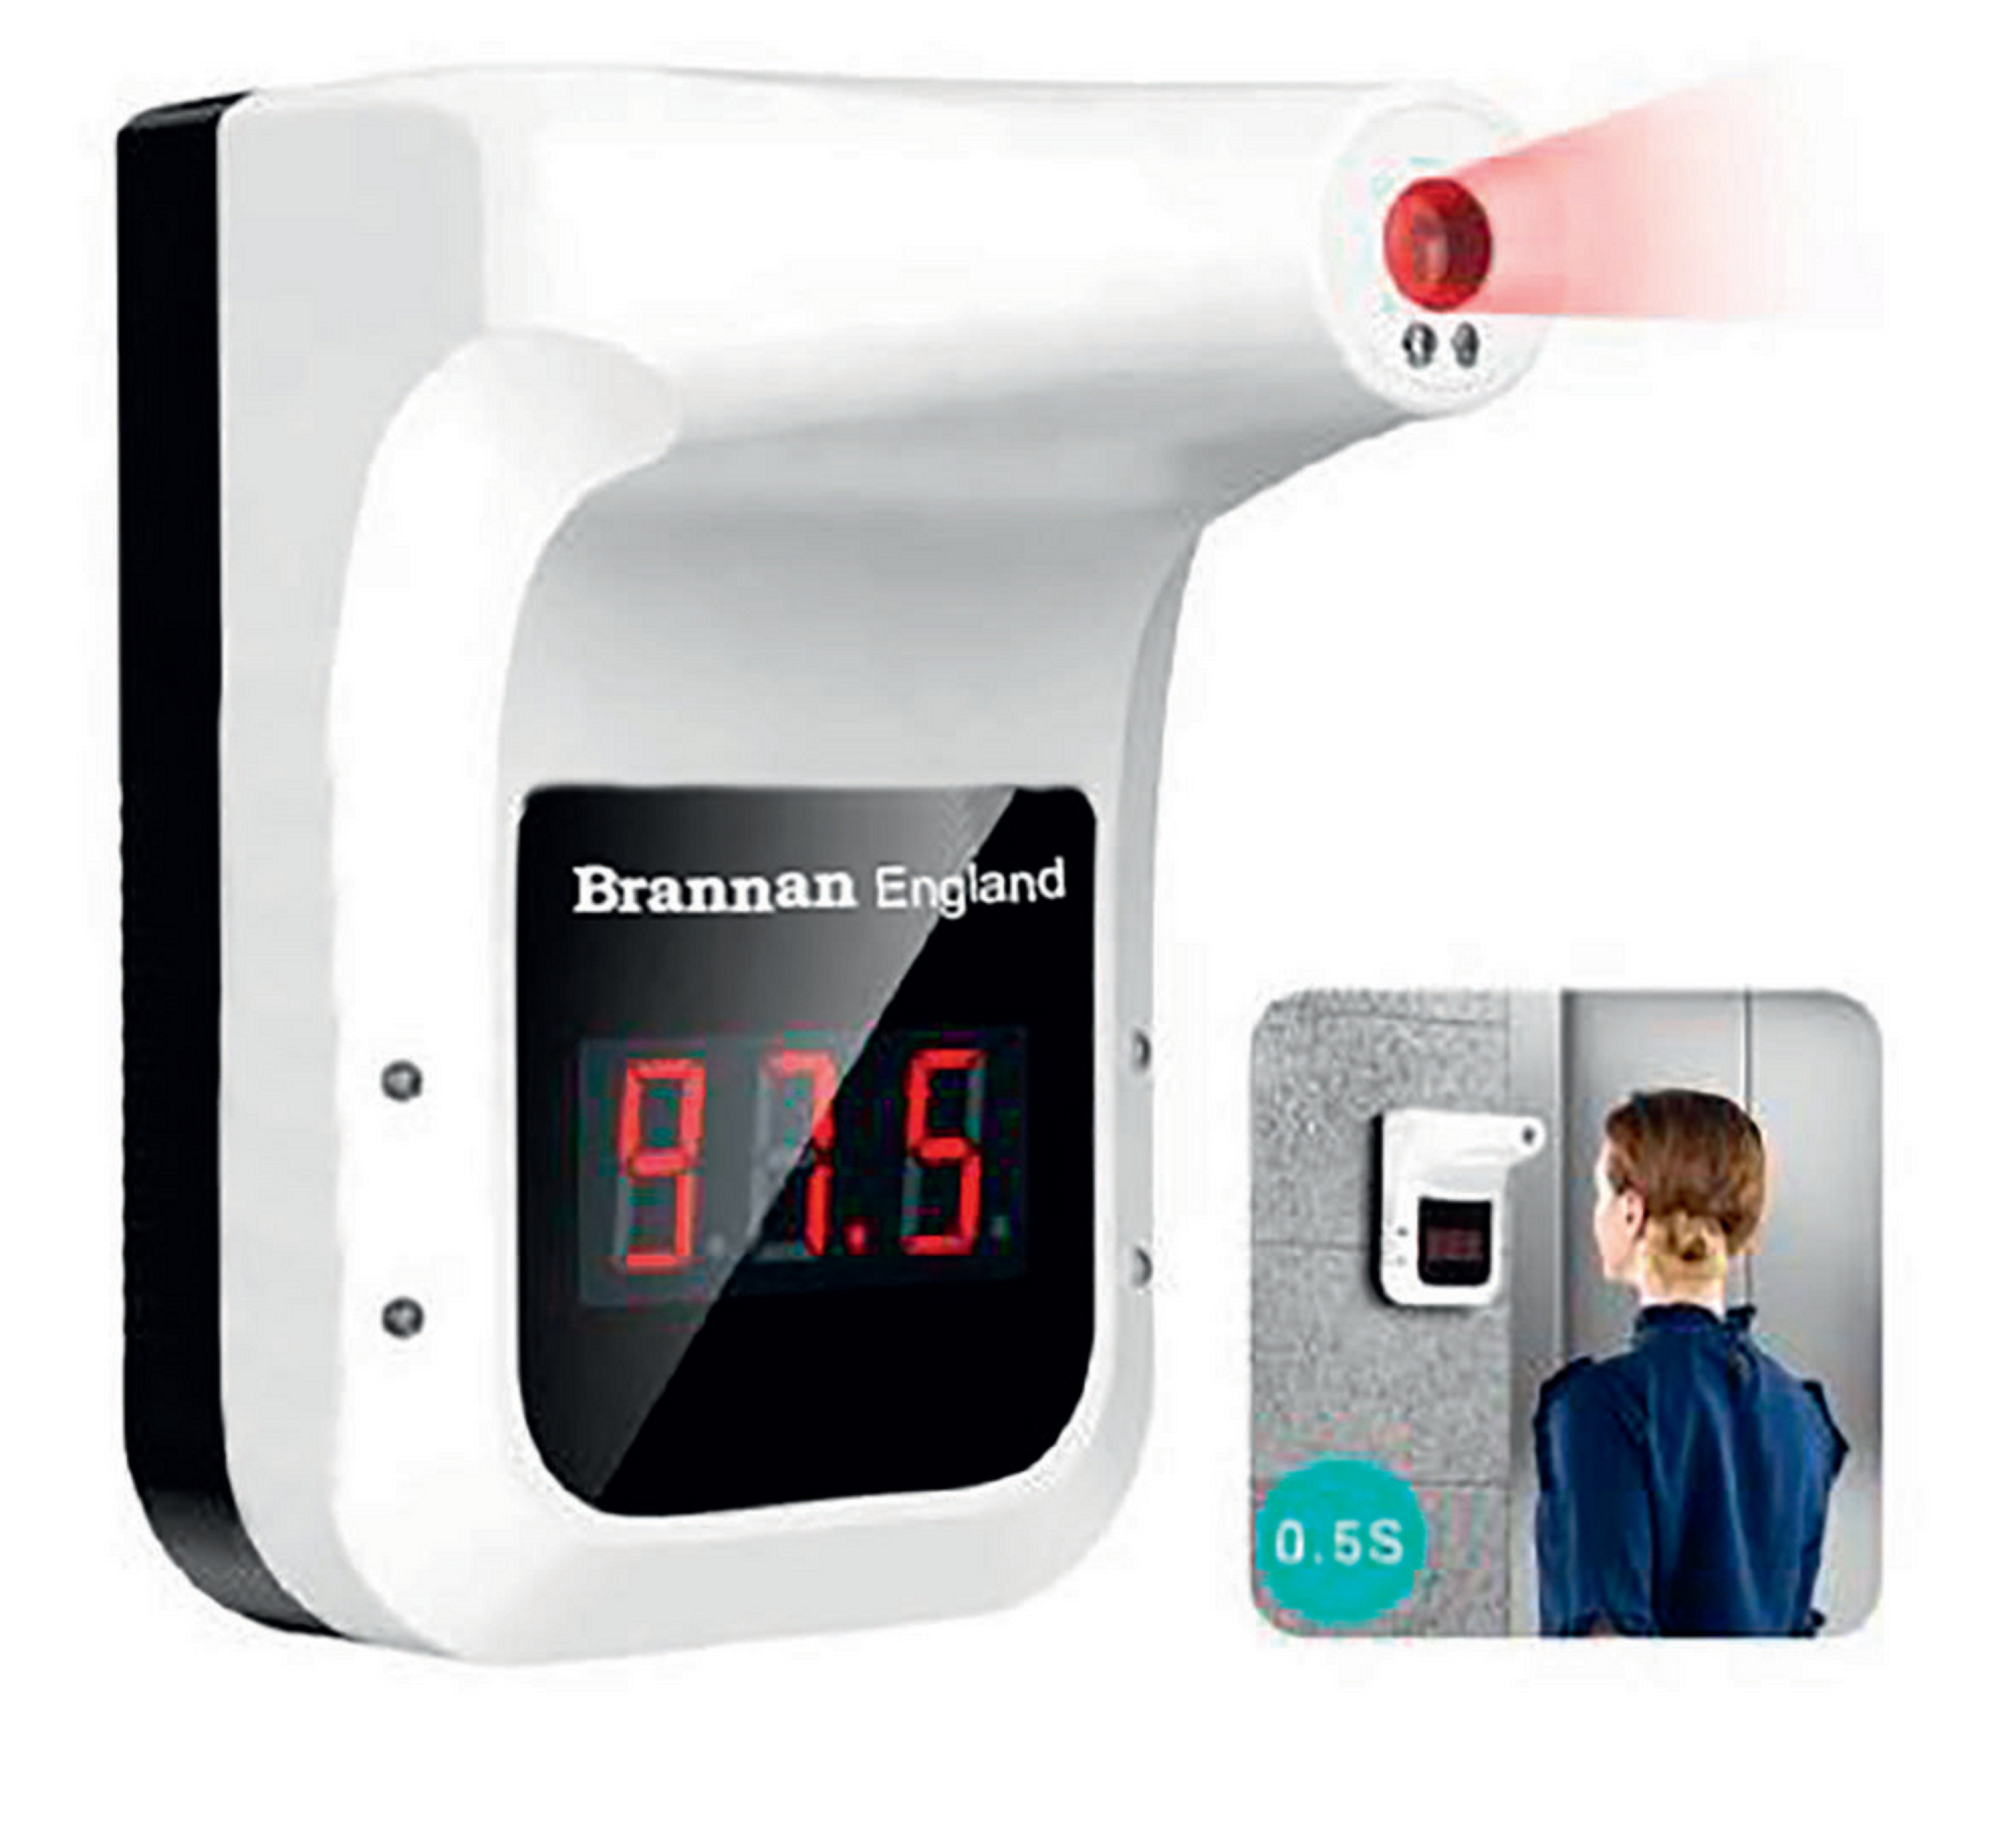 Infrared Wall Thermometer